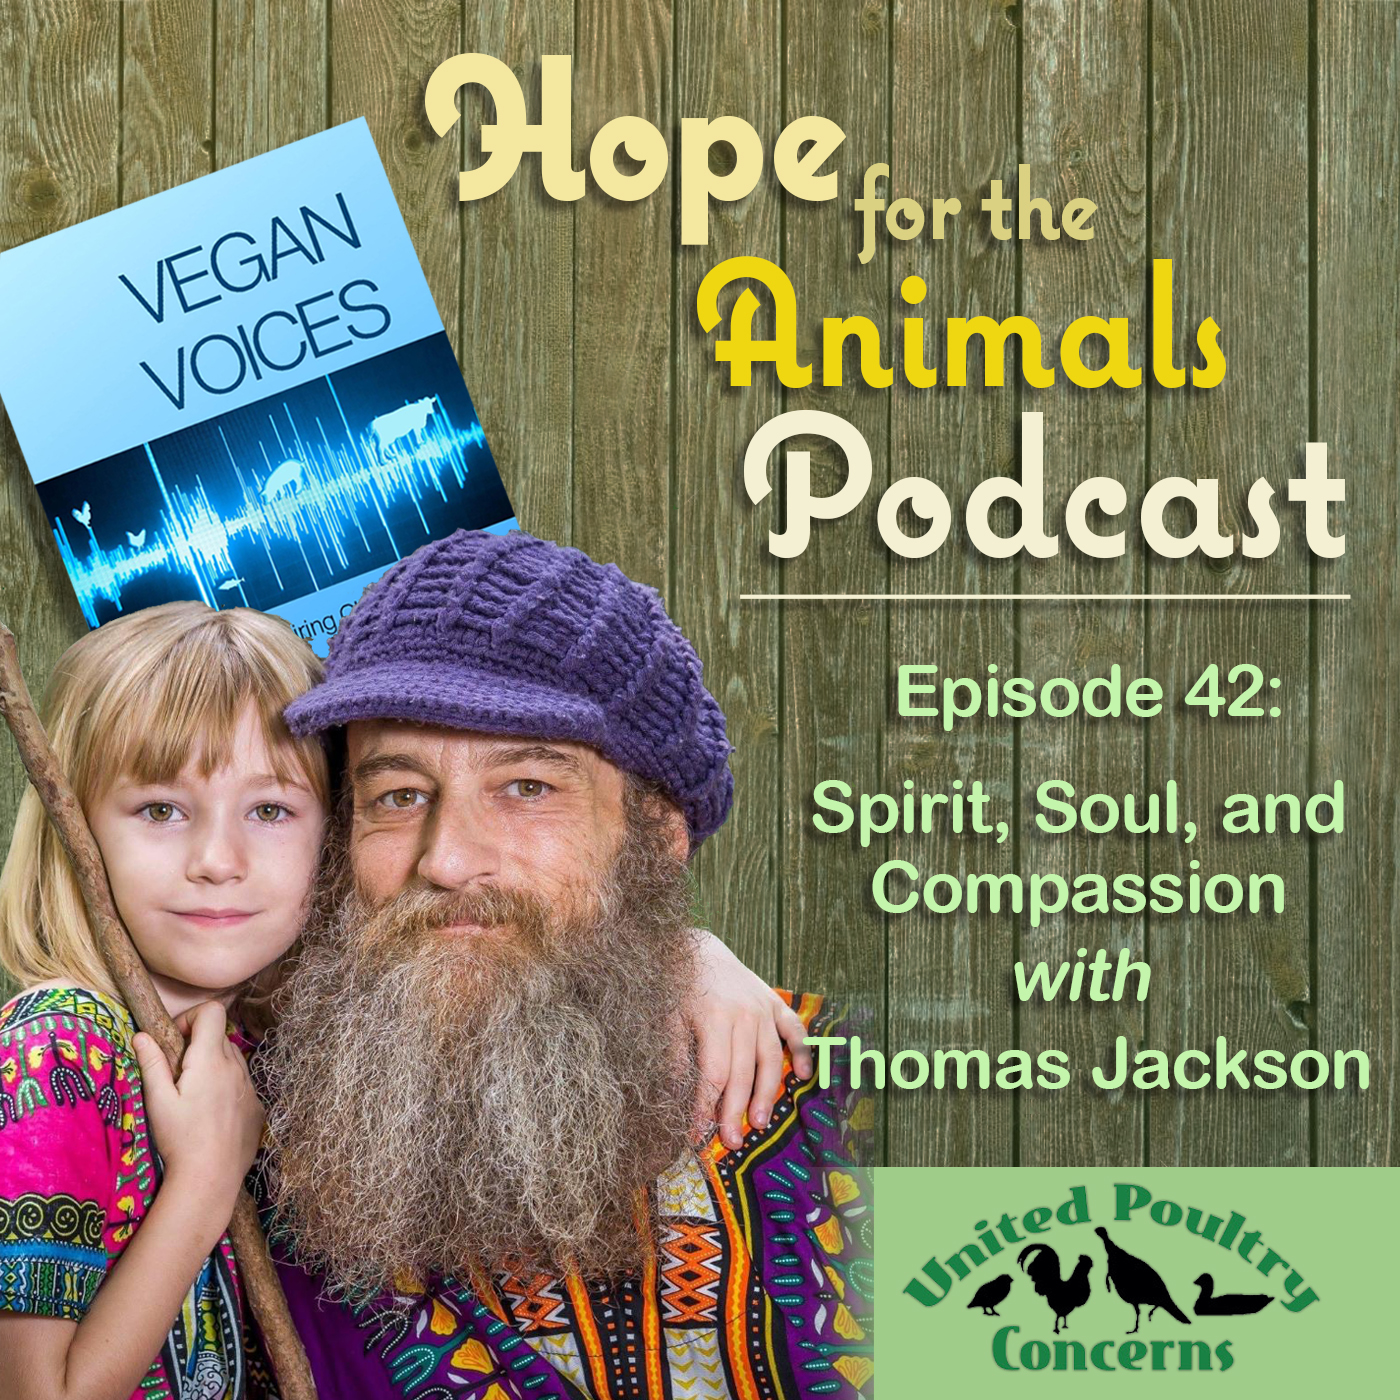 Episode 42: Spirit, Soul, and Compassion with Thomas Jackson